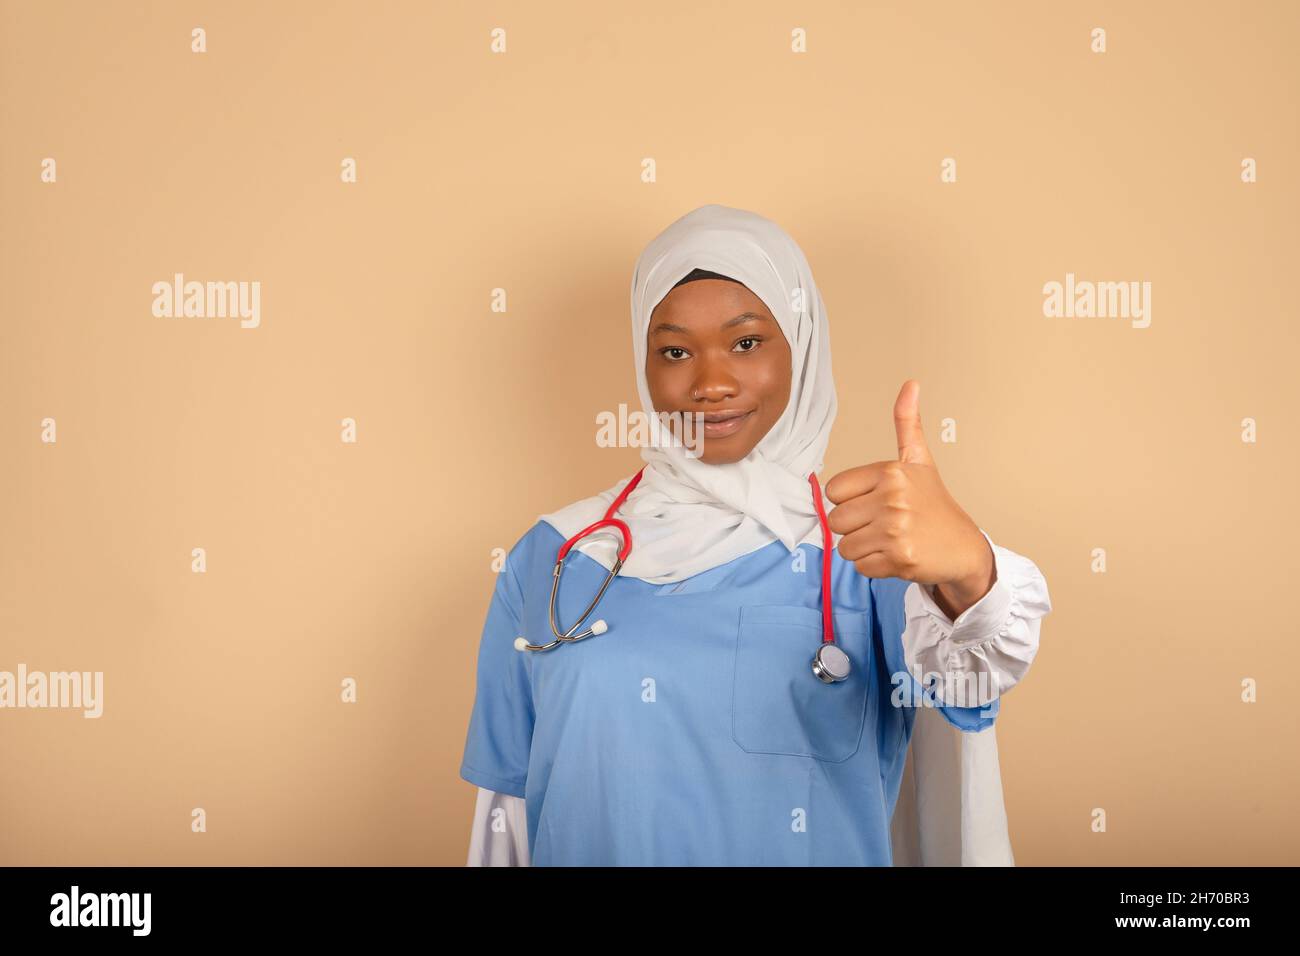 African American nurse with headscarf showing thumb up, posing on light background, free space Stock Photo